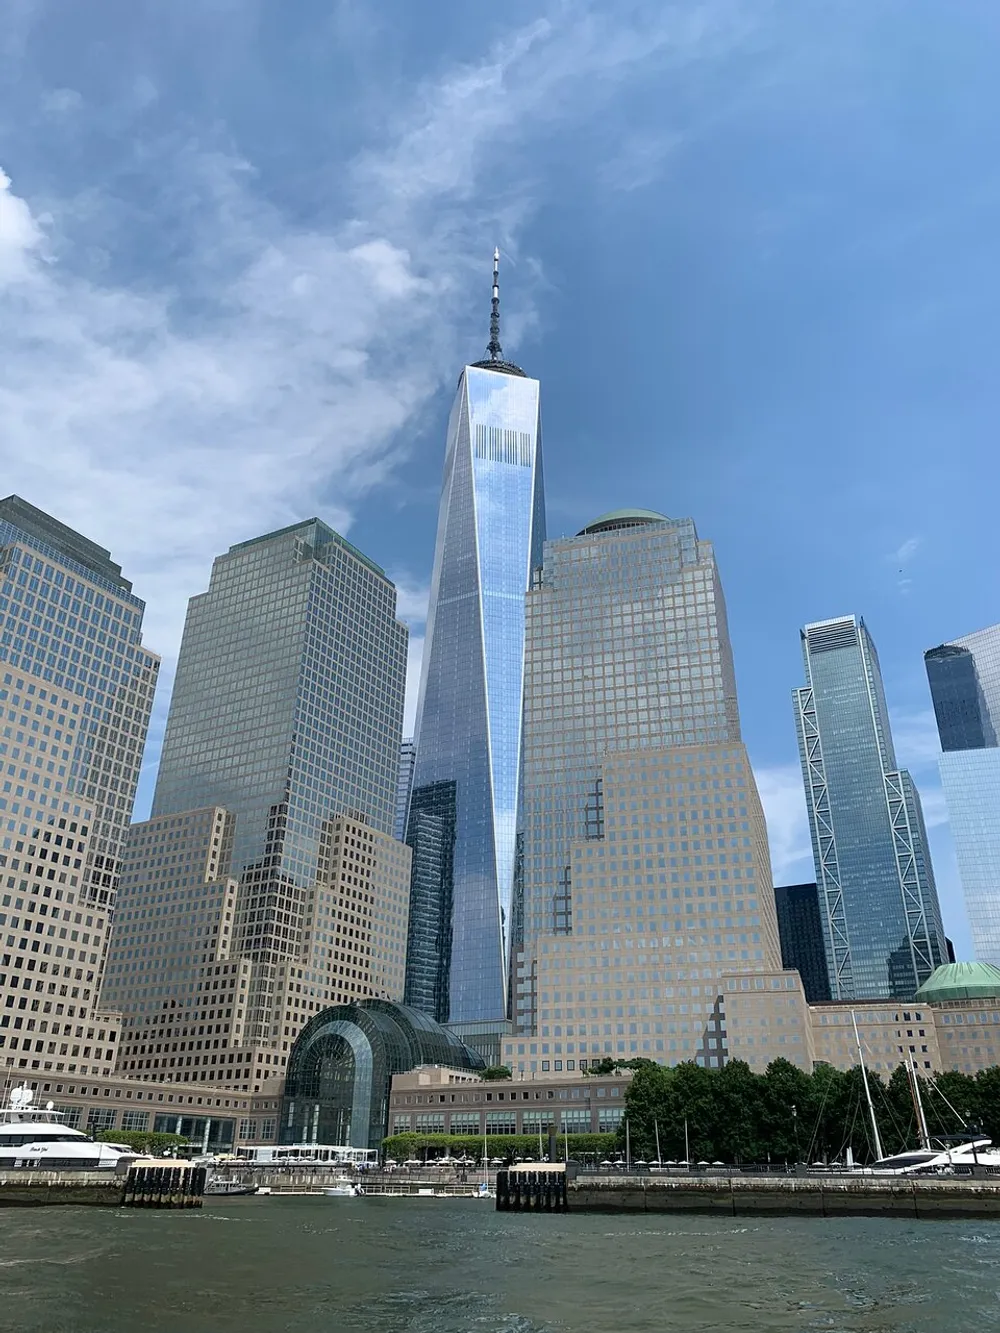 The image shows the skyline with the One World Trade Center dominating the backdrop viewed from the water under a partly cloudy sky